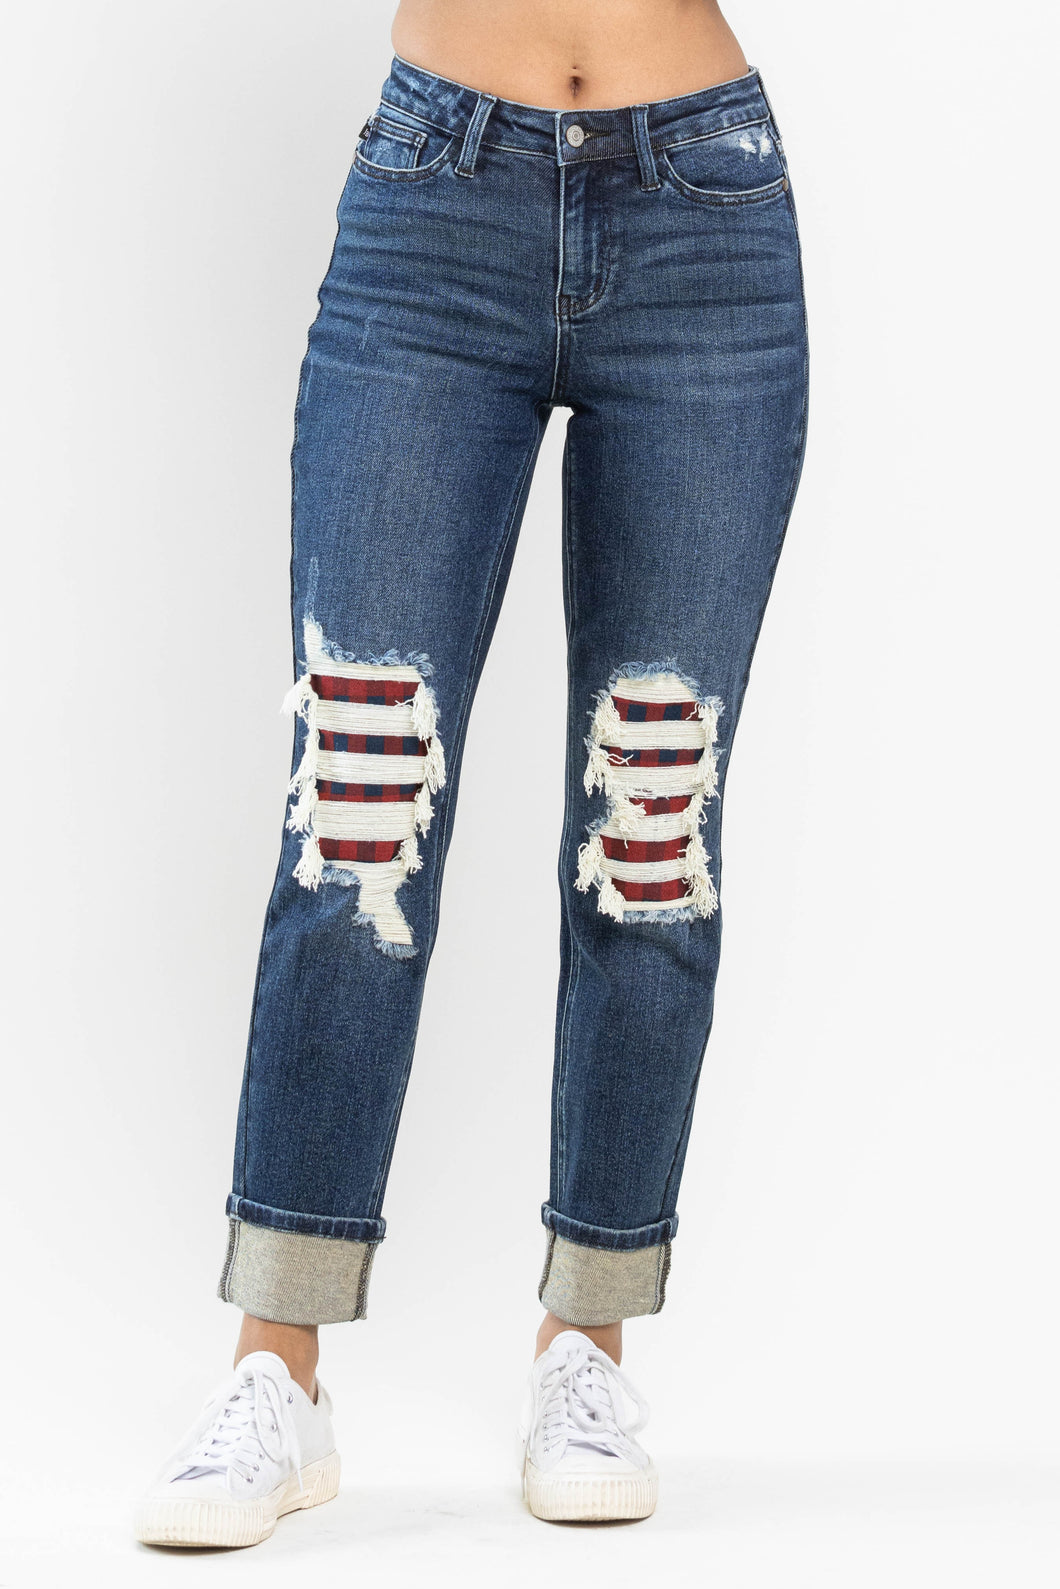 Dark Judy Blue Mid Rise Buffalo Plaid Destroyed Patches & Cuff Judy Blue Jeans 9/27/23 7098